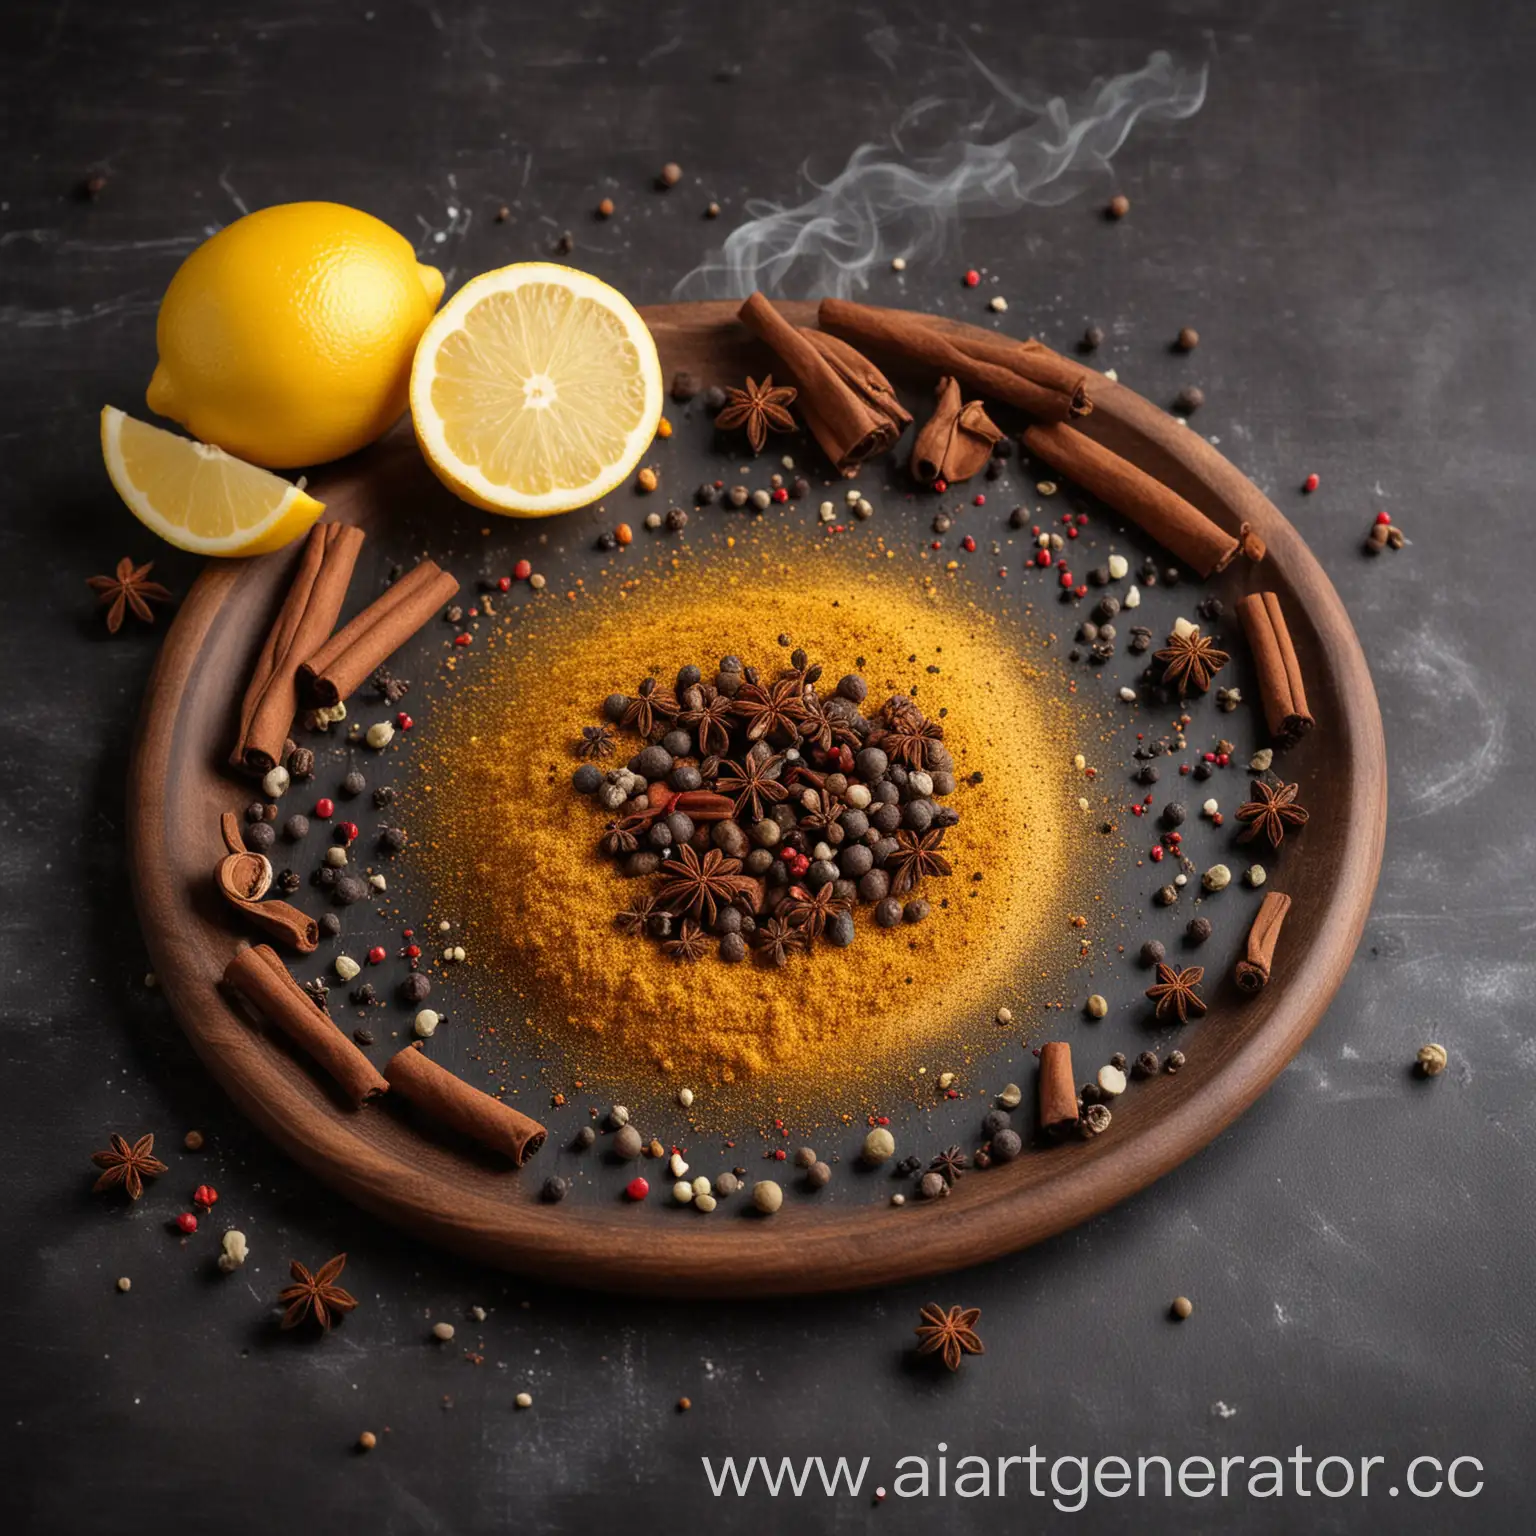 Smoky-Lemon-with-Pepper-and-Spices-Aromatic-Culinary-Composition